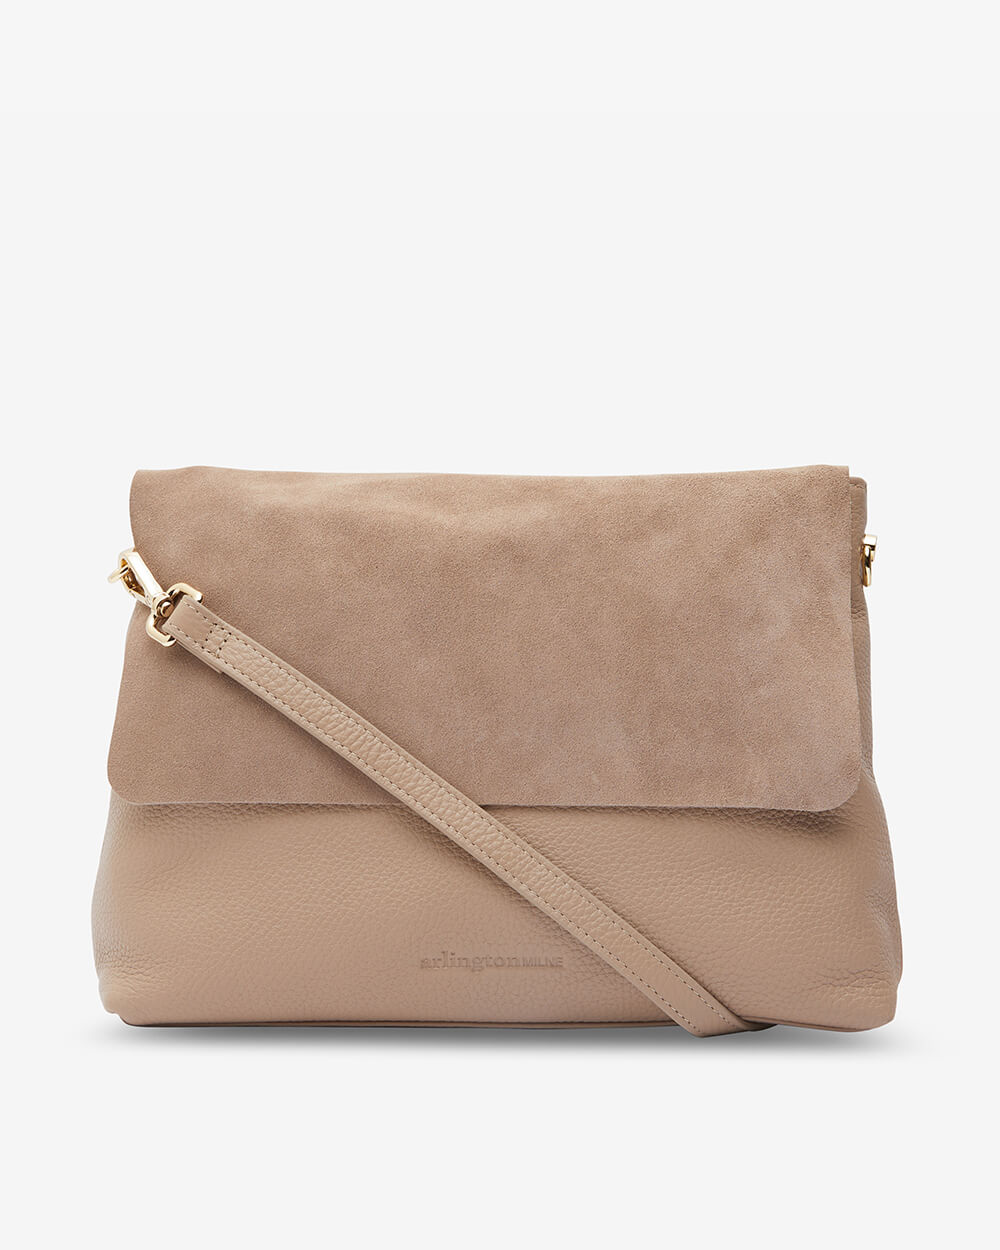 Amber Bag - Fawn Suede/Pebble